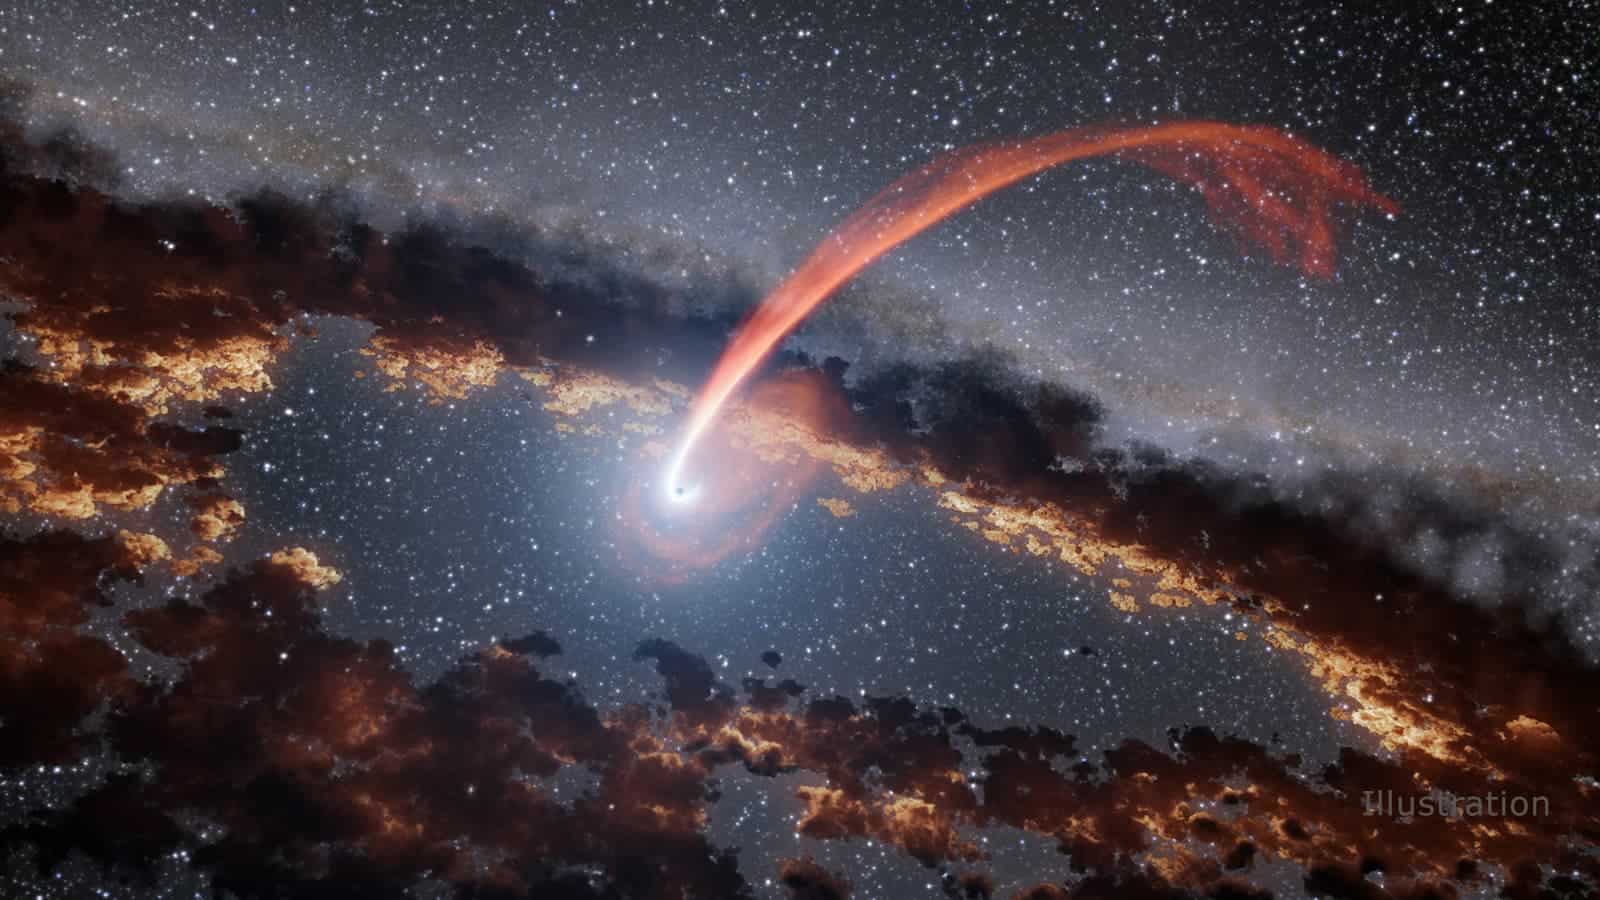 This illustration shows a glowing stream of material from a star as it is being devoured by a supermassive black hole in a tidal disruption flare. Image credit: NASA/JPL-Caltech